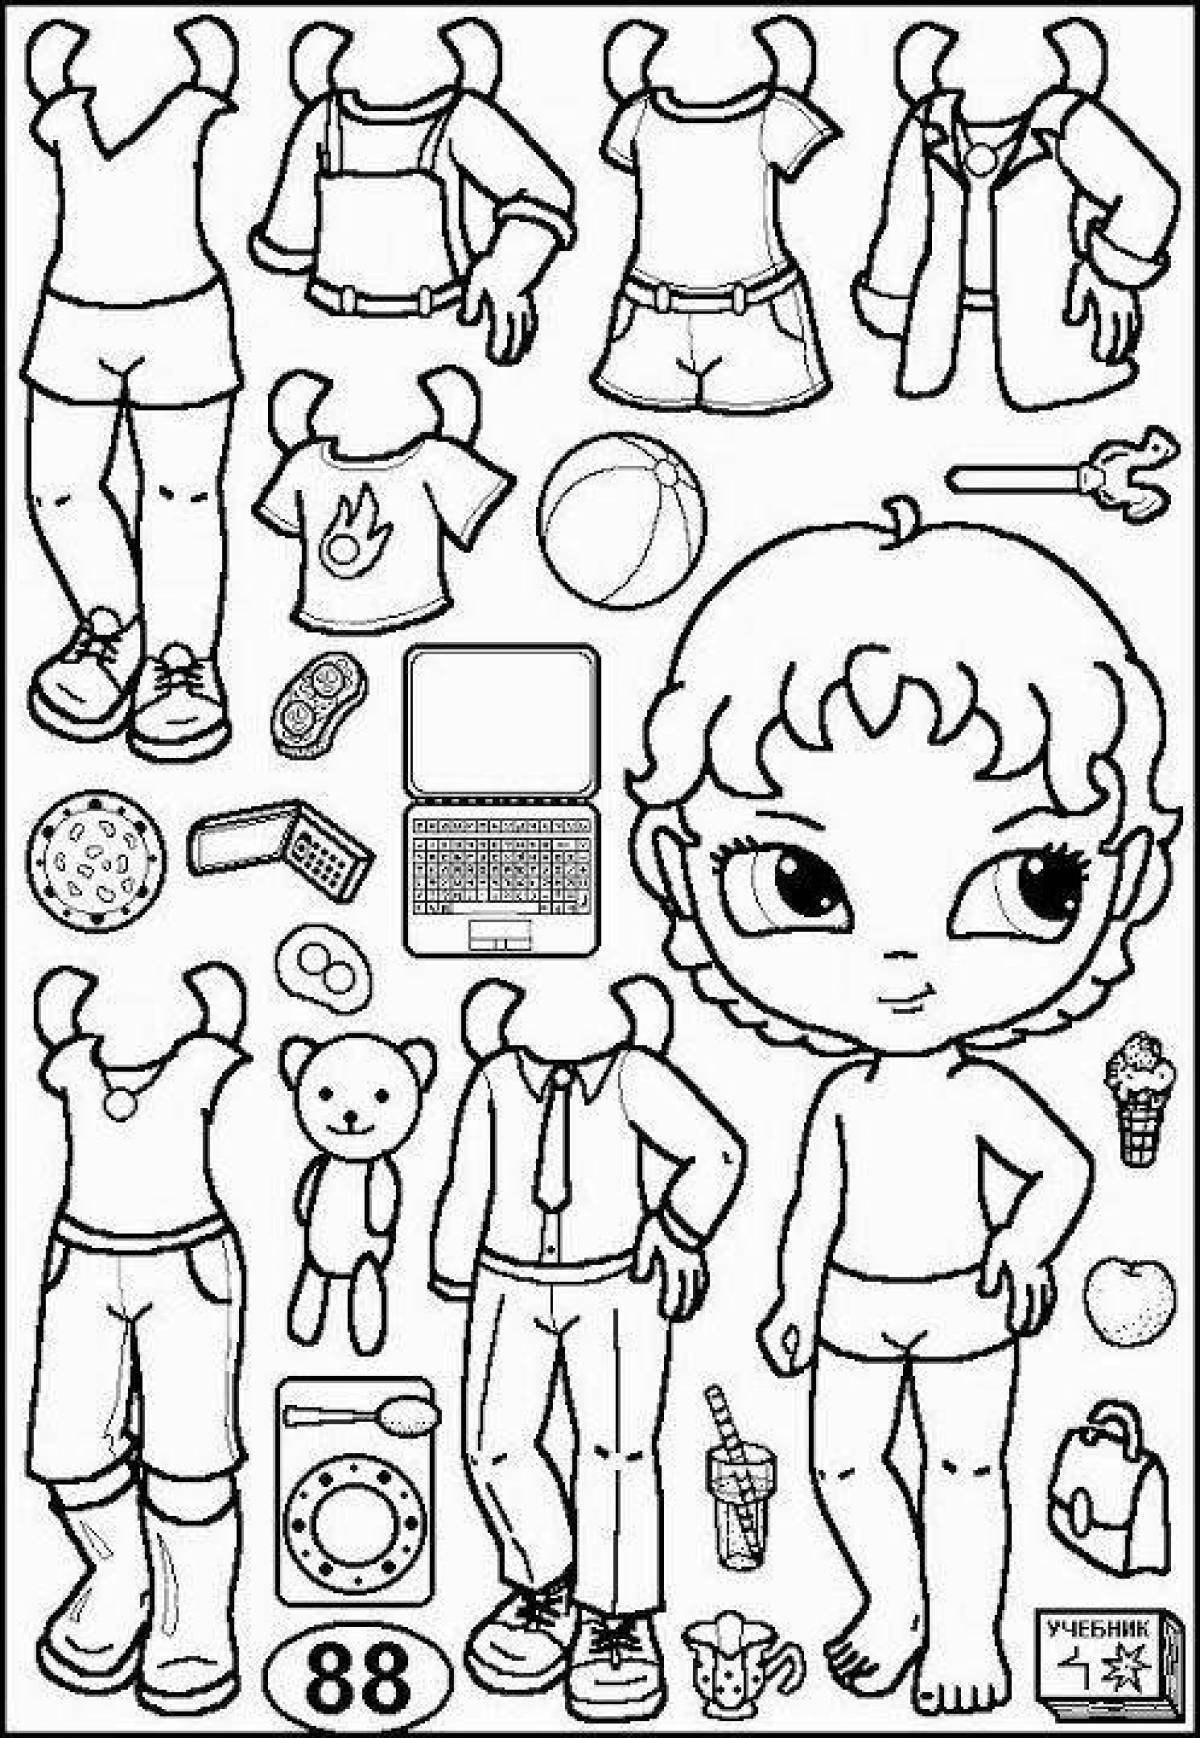 Glitzy coloring page lol doll cut out clothes